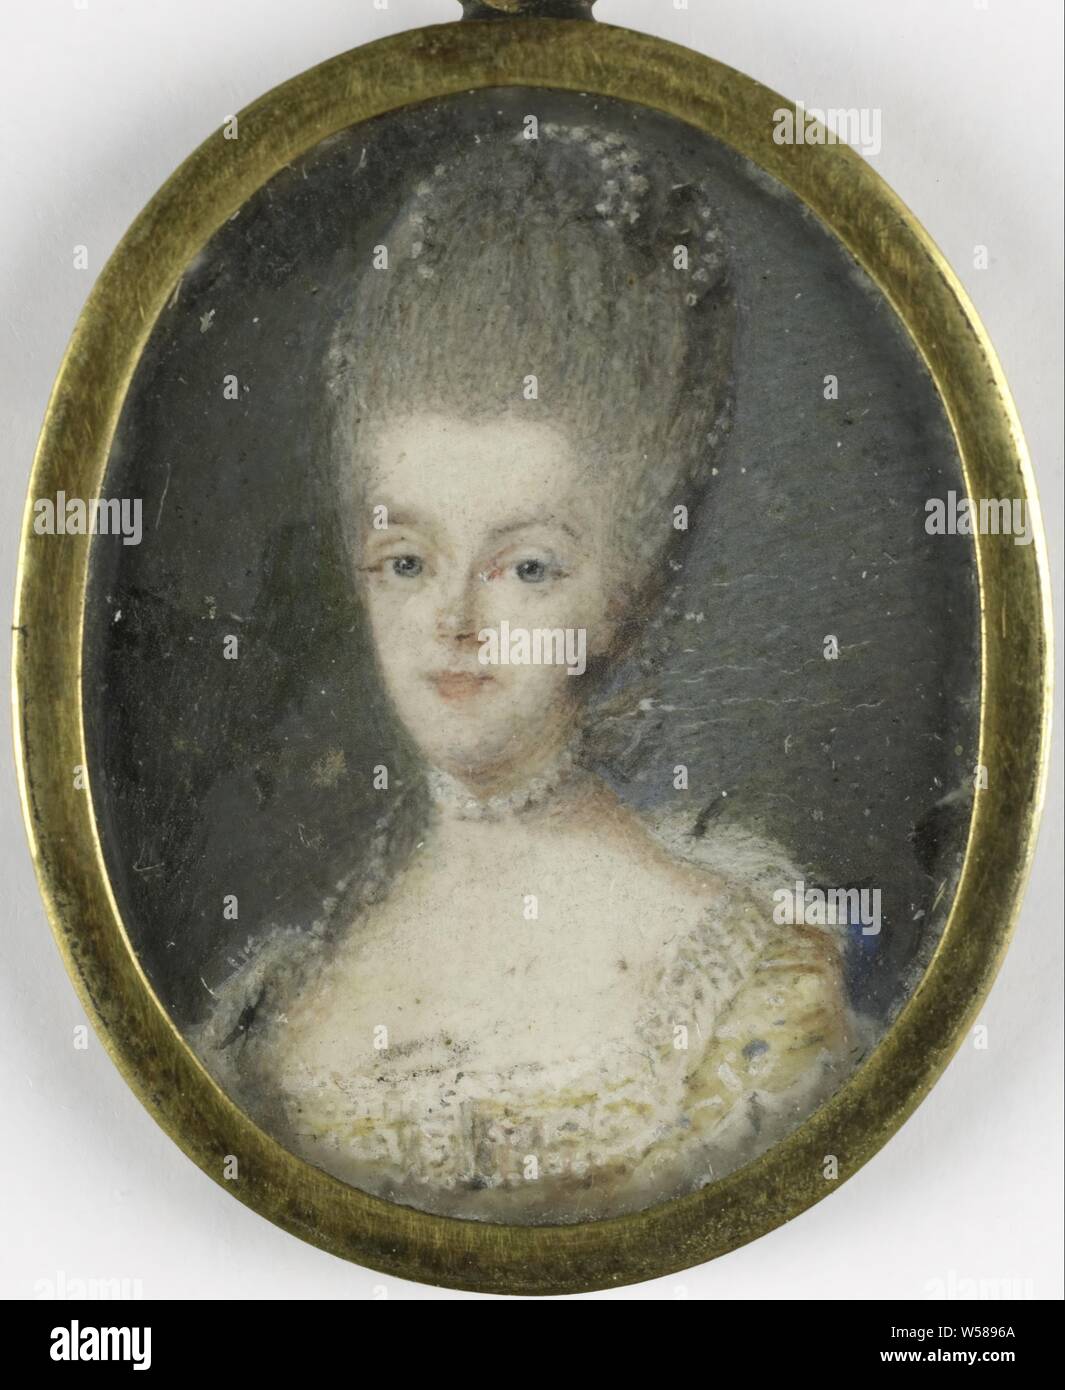 Frederika Sophia Wilhelmina (Wilhelmina, 1751-1820), princess of Prussia. Wife of William V, Portrait of Frederika Sophia Wilhelmina (1751-1820), Princess of Prussia. Wife of Willem V. Buste, facing front. Part of the collection of portrait miniatures, Wilhelmina van Prussia (1751-1820), Robert Mussard, 1768, parchment (animal material), metal, glass, h 3.3 cm × w 2.7 cm h 4.1 cm × w 2.8 cm × d 0.5 cm Stock Photo